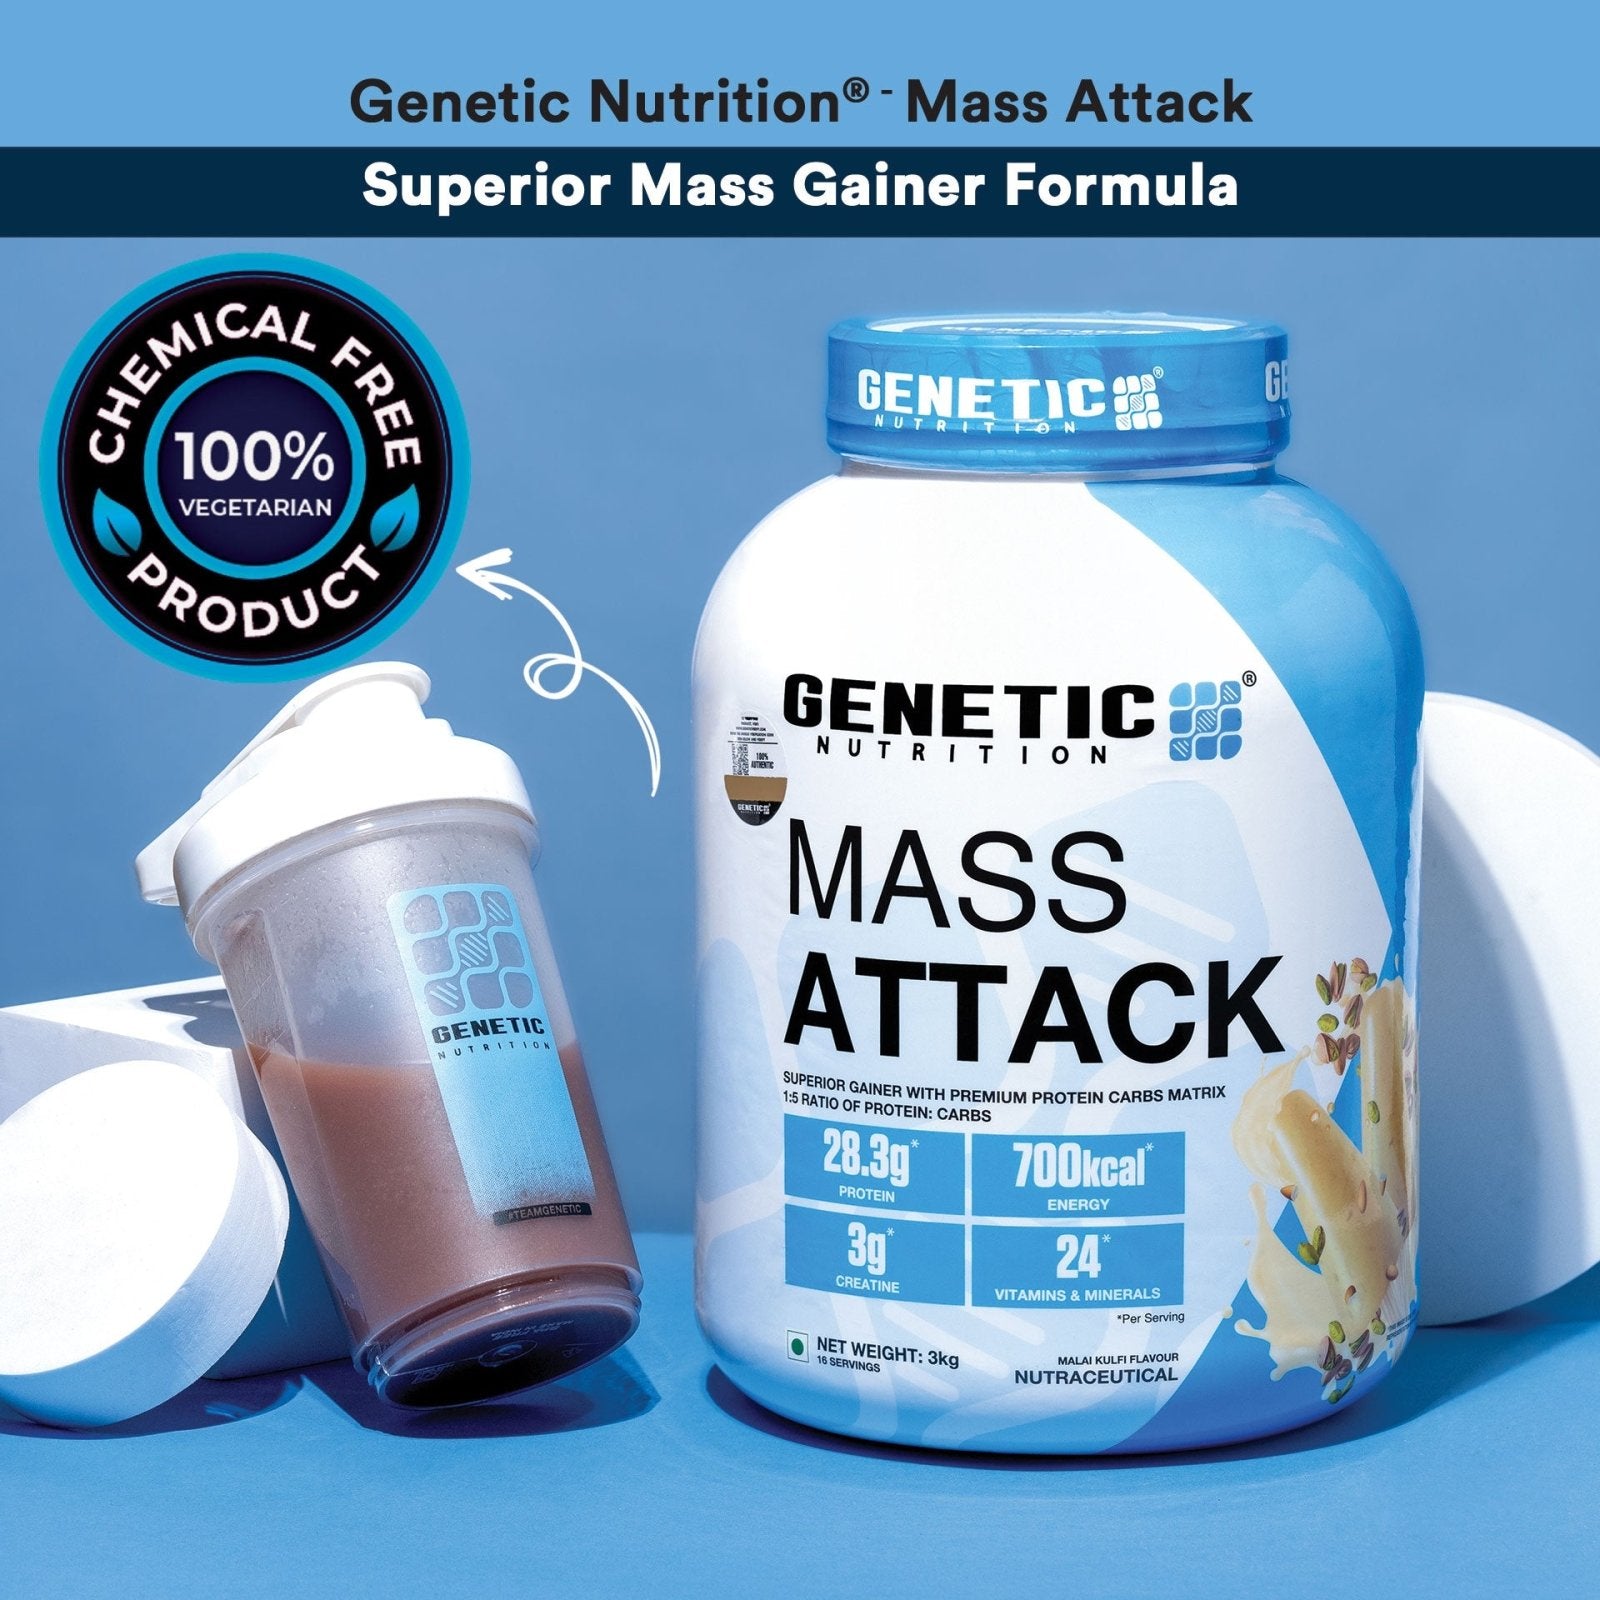 MASS ATTACK - Genetic Nutrition